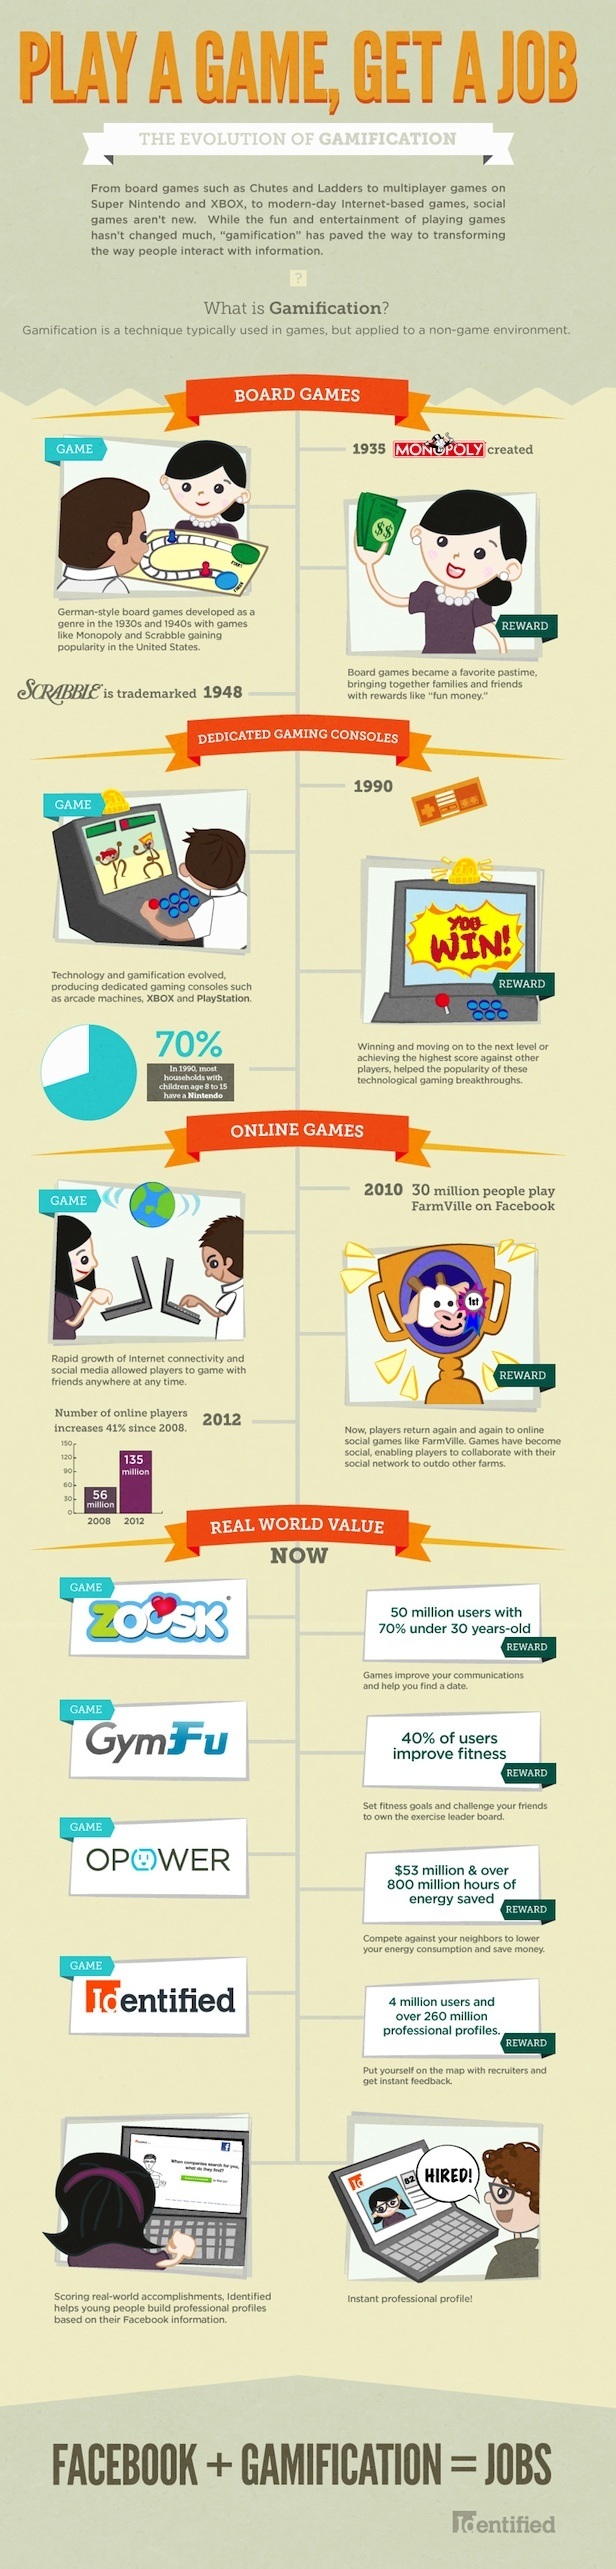 The-Evolution-of-Gamification-Infographic